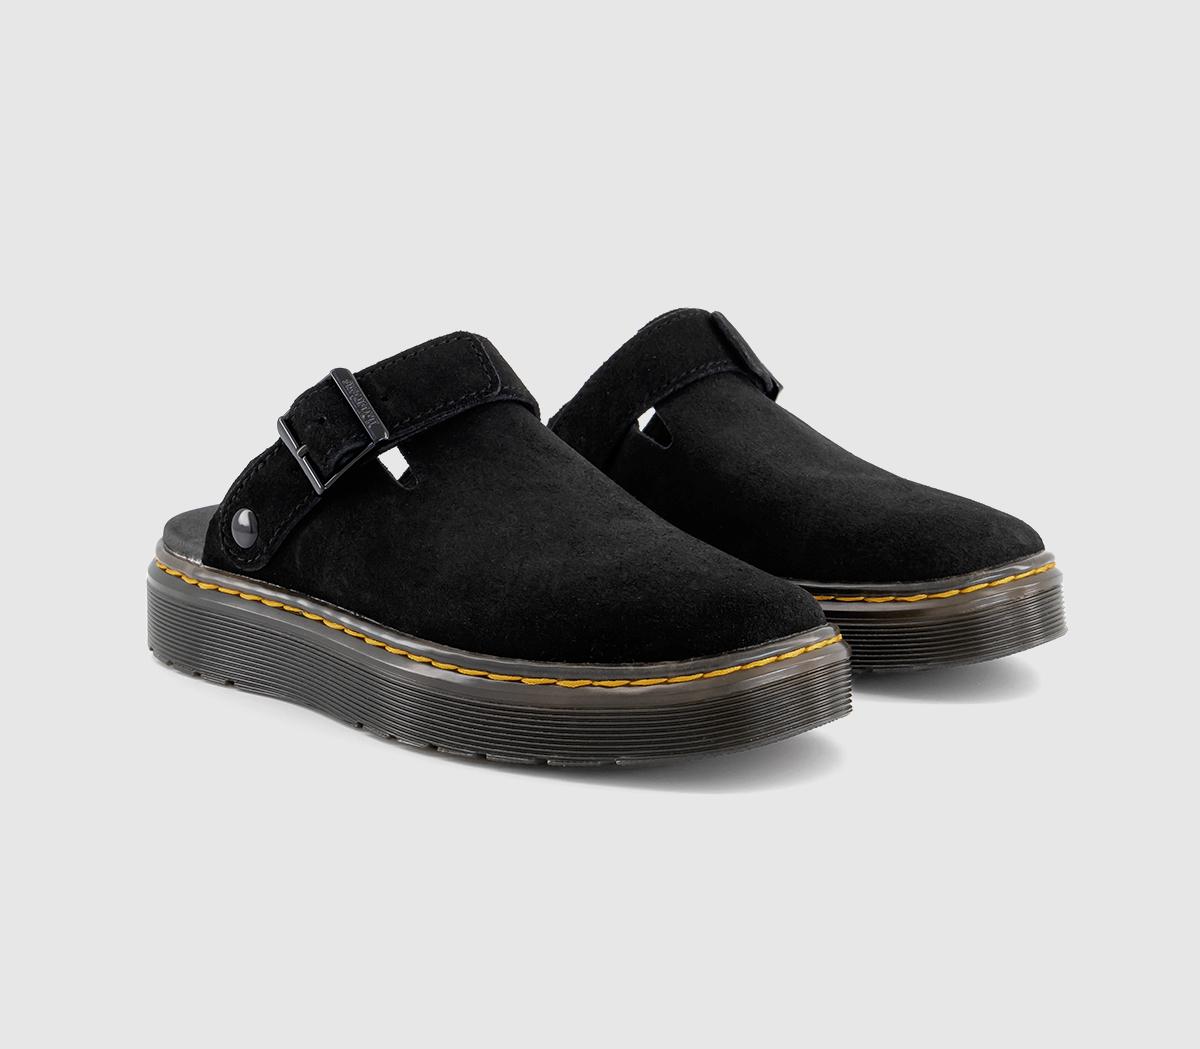 Dr. Martens Womens Carlson Mules Black Suede, 7